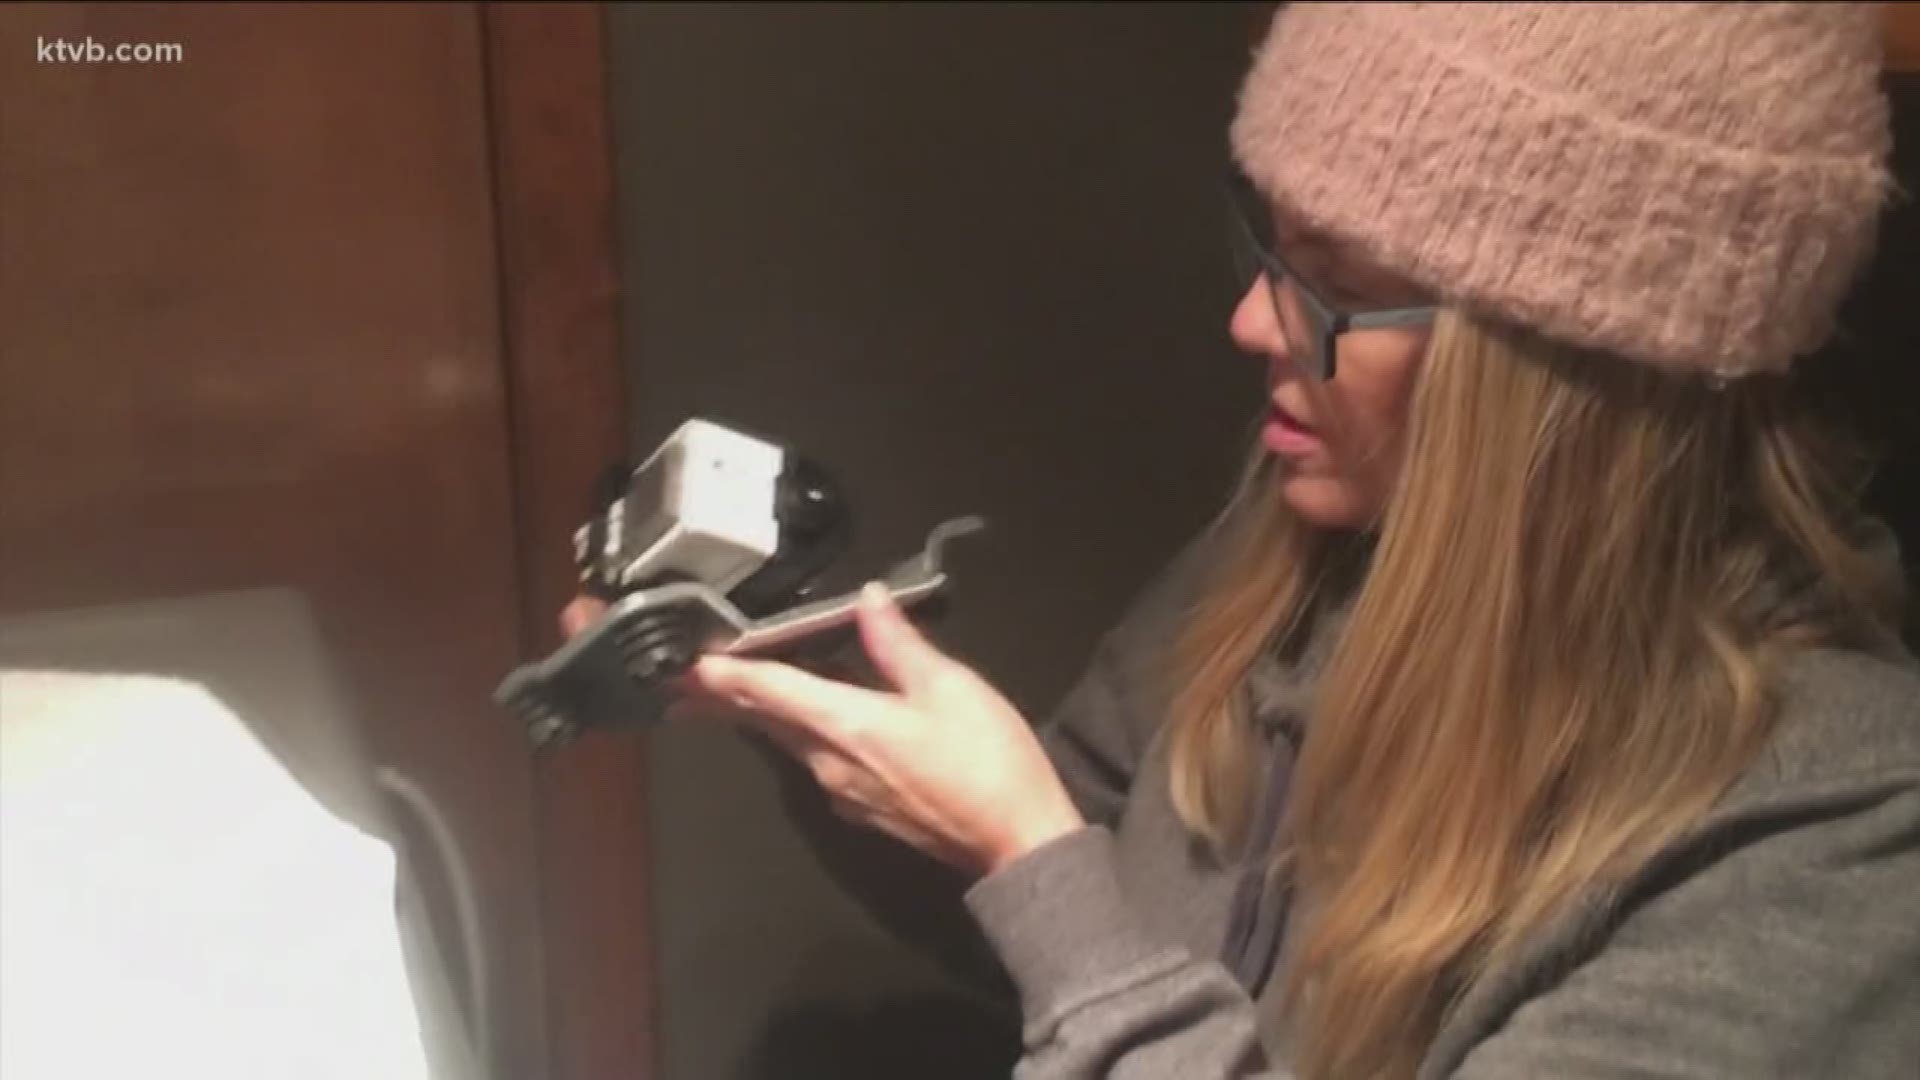 Chrissy Johnson went on YouTube and found out how to replace the drain pump on her washing machine.